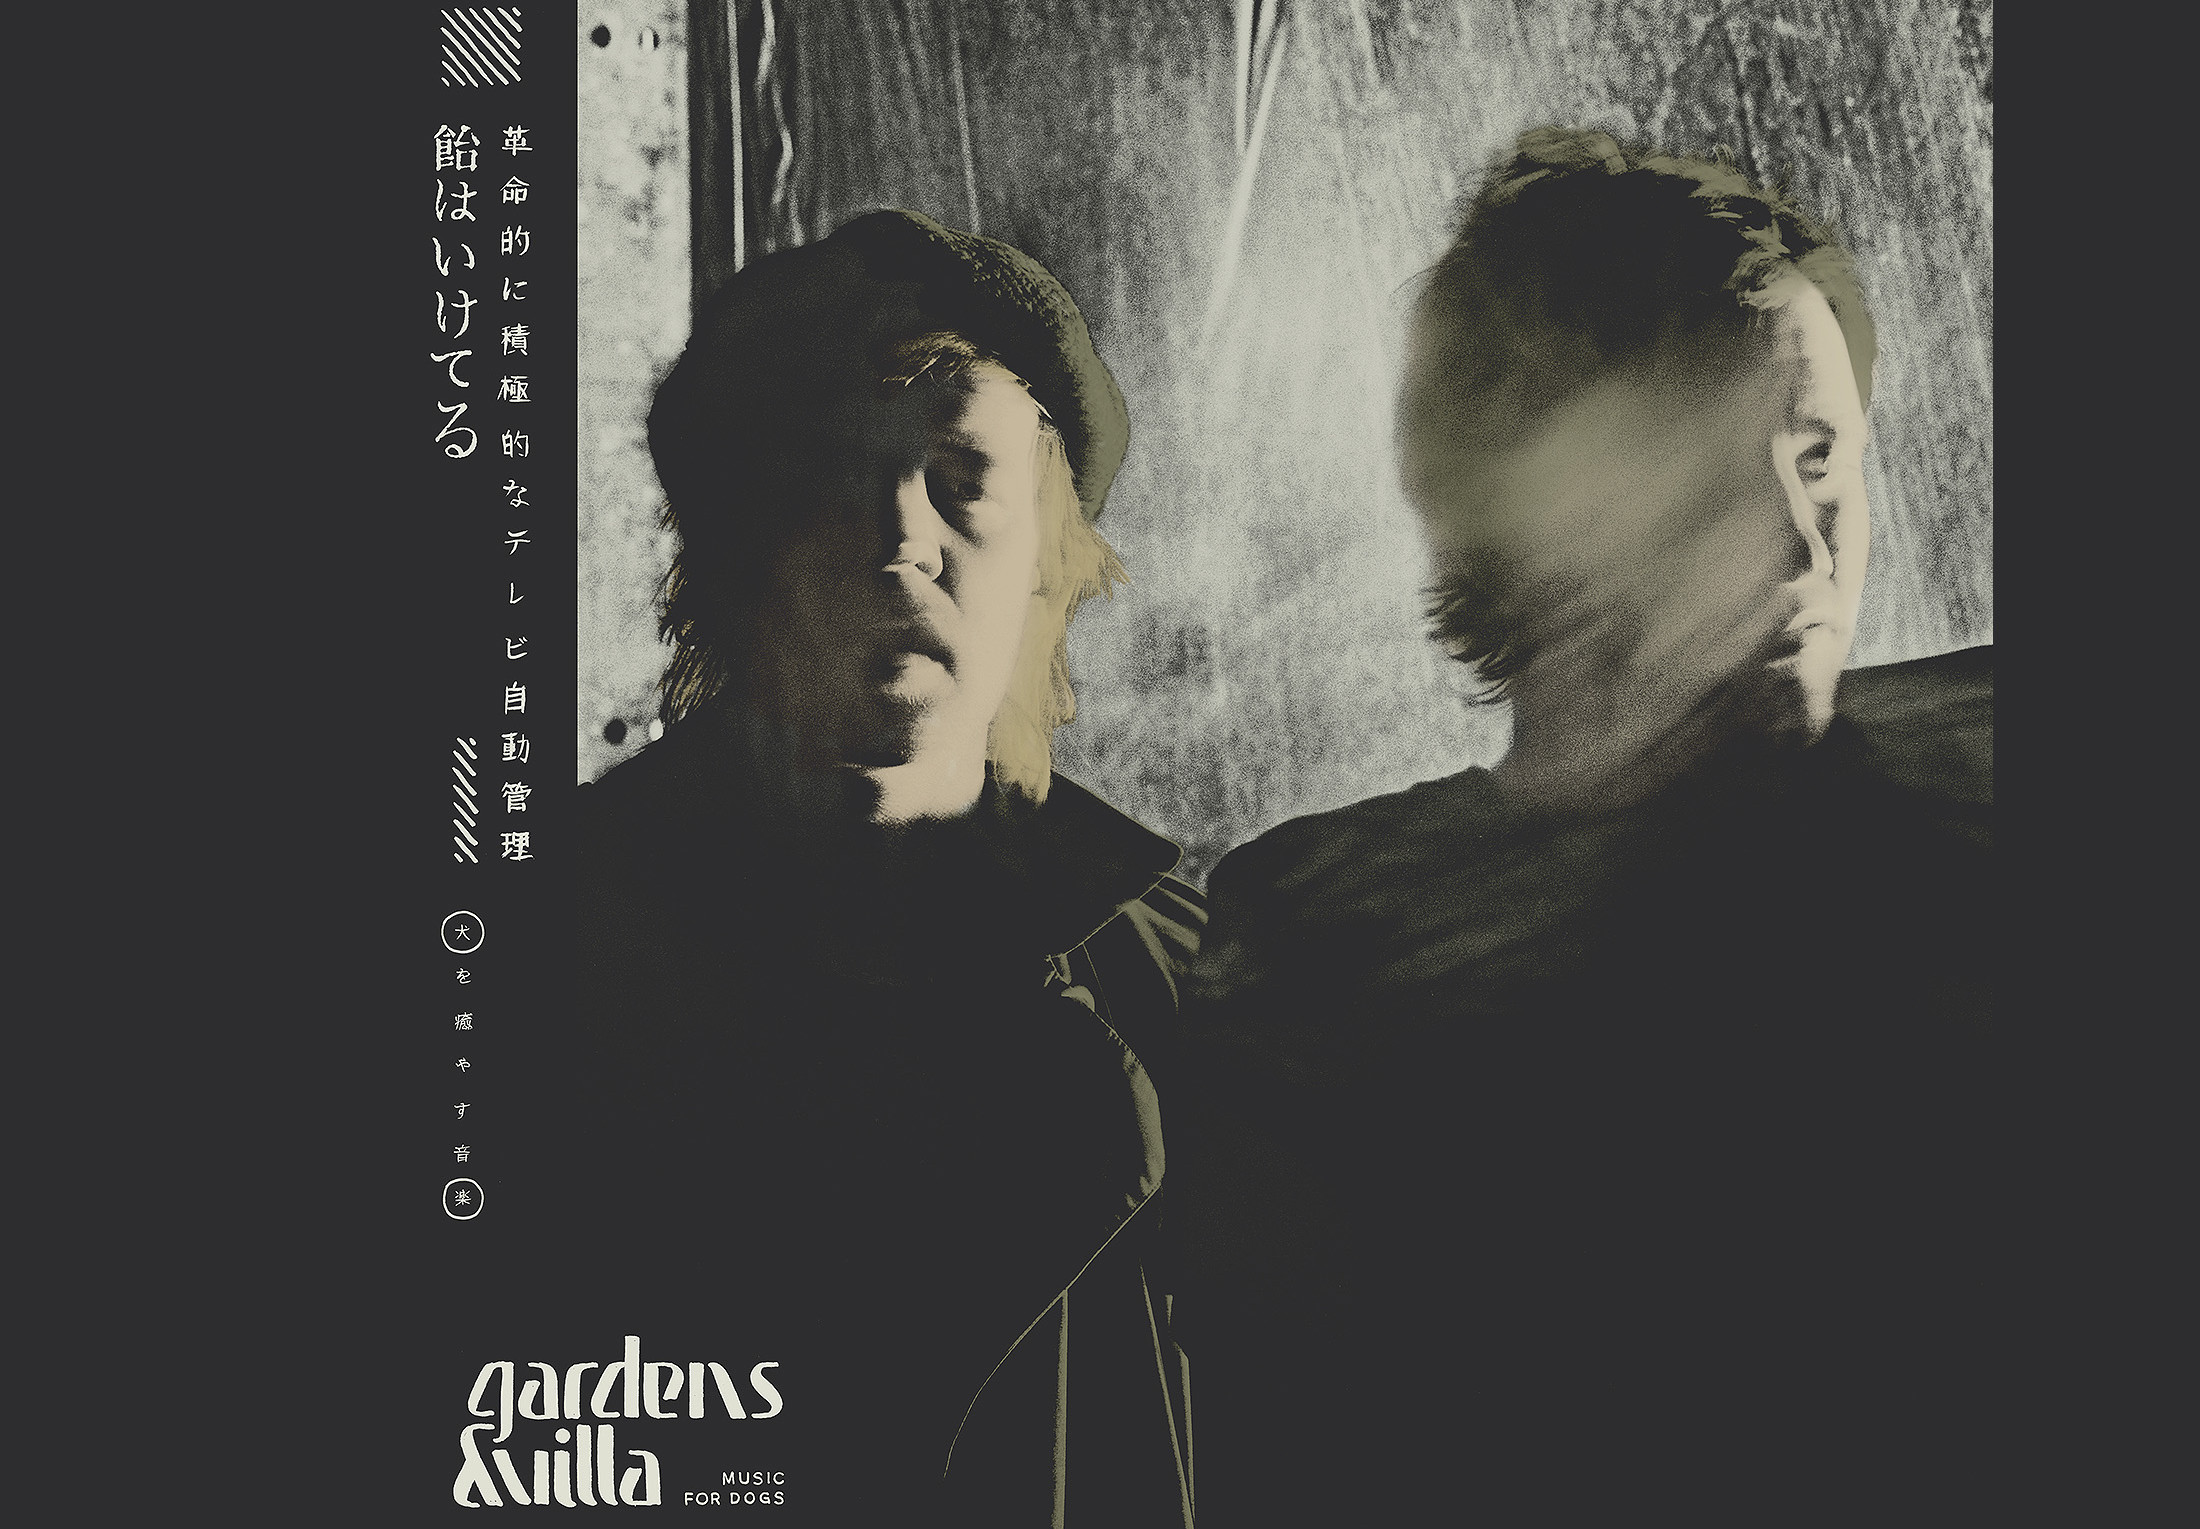 Review of Gardens & Villa's new album 'Dog's Life'. the band's full length comes out on August 21st via Secretly Canadian.